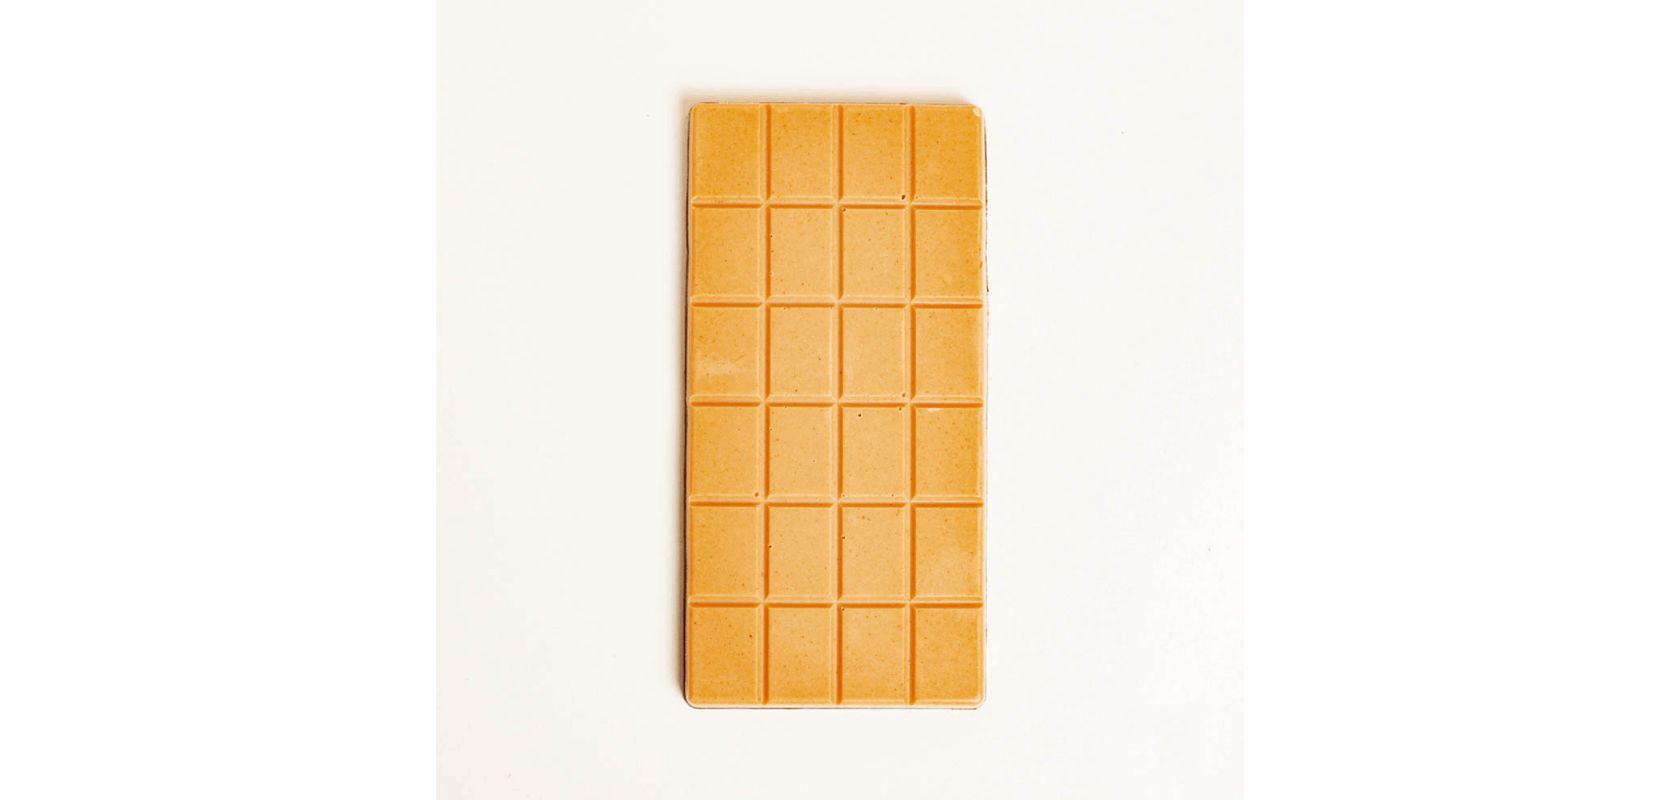 PVRE - Rosin Peanut Budder Chocolate Bar 800mg THC is an edible made for heavy hitters.  The cannabis chocolate packs a wholesome 800mg for an entire bar, which may be helpful for chronic pain and tolerant users. 